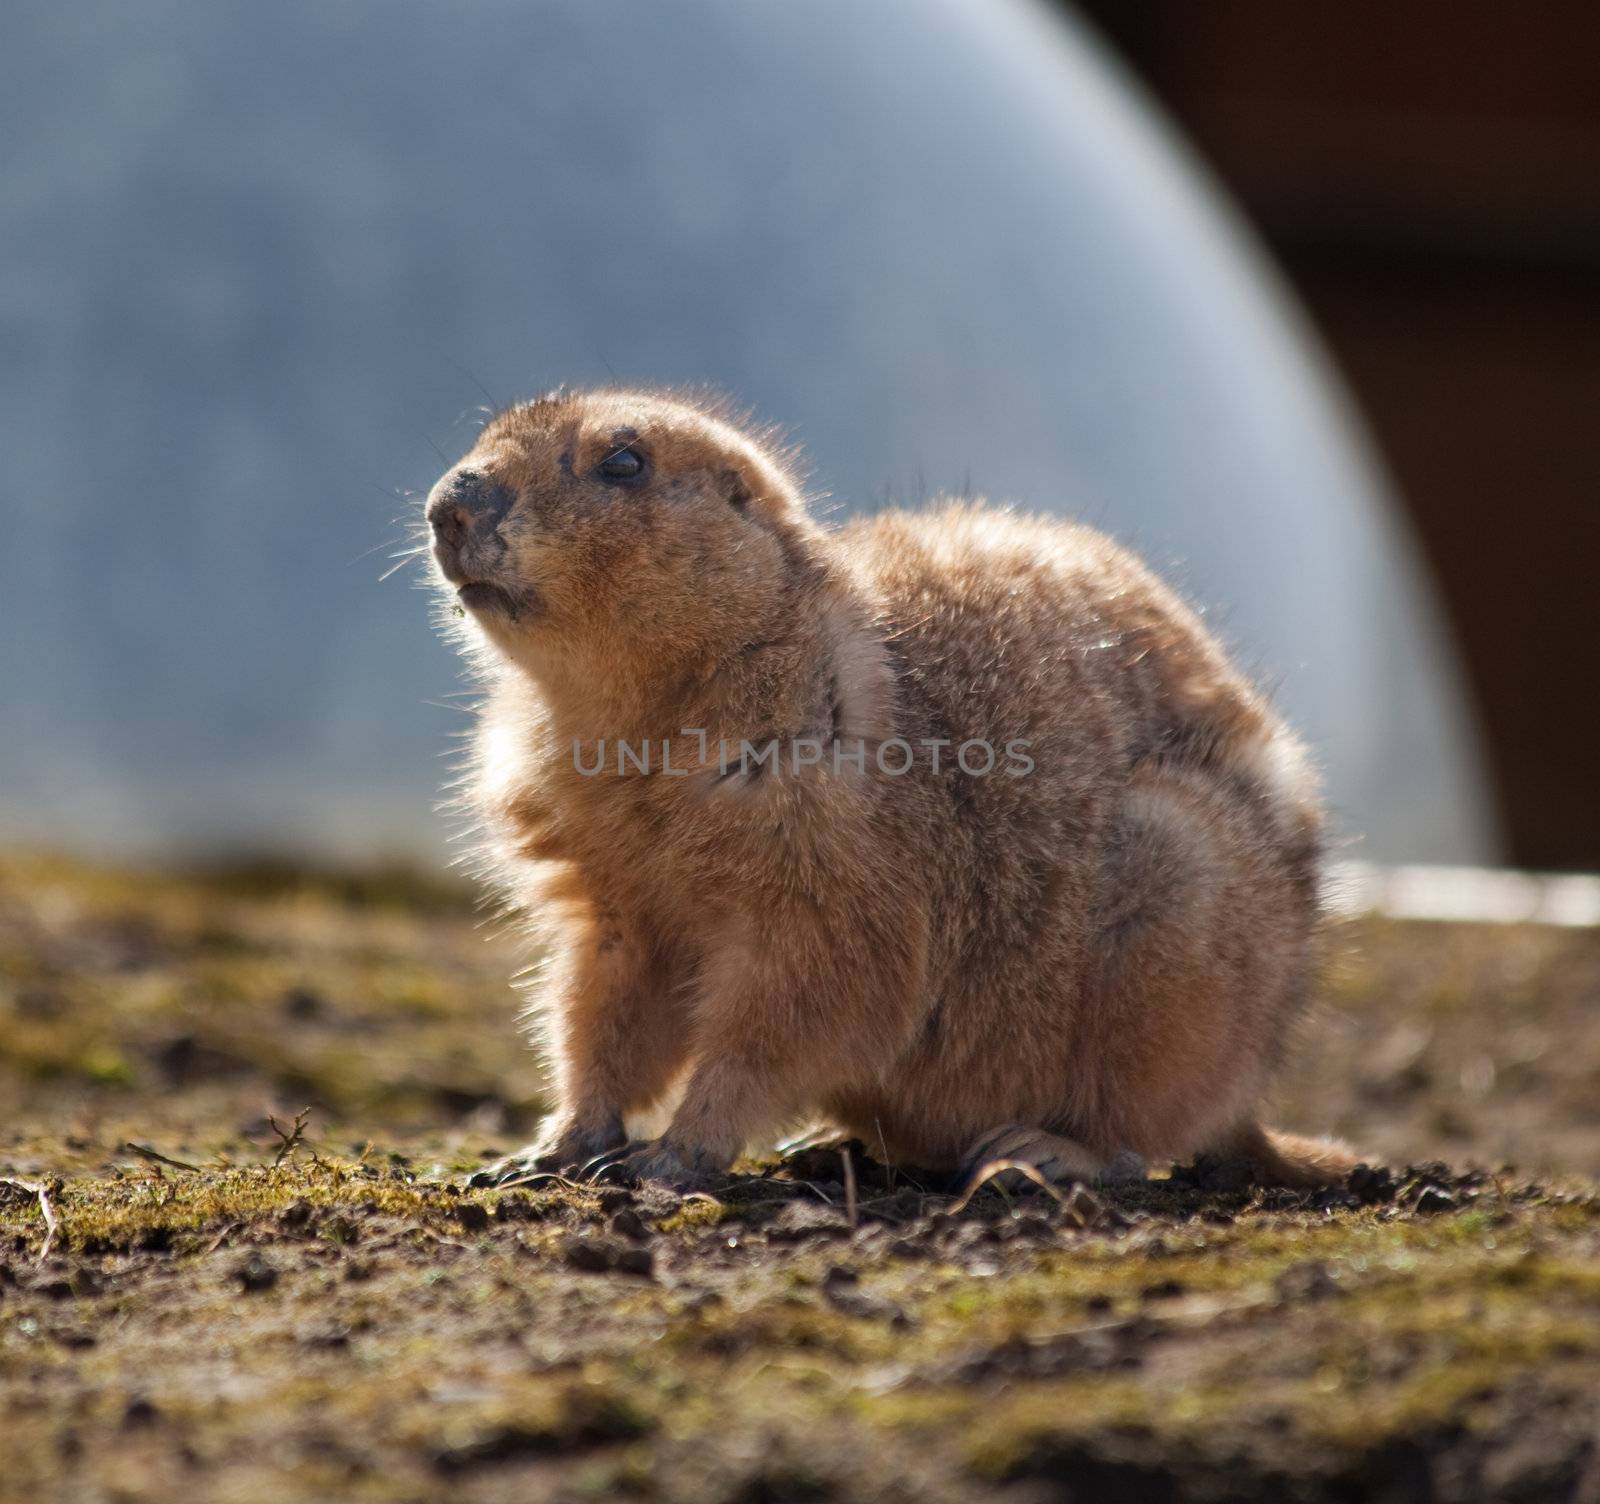 A prairie dog lit from the back